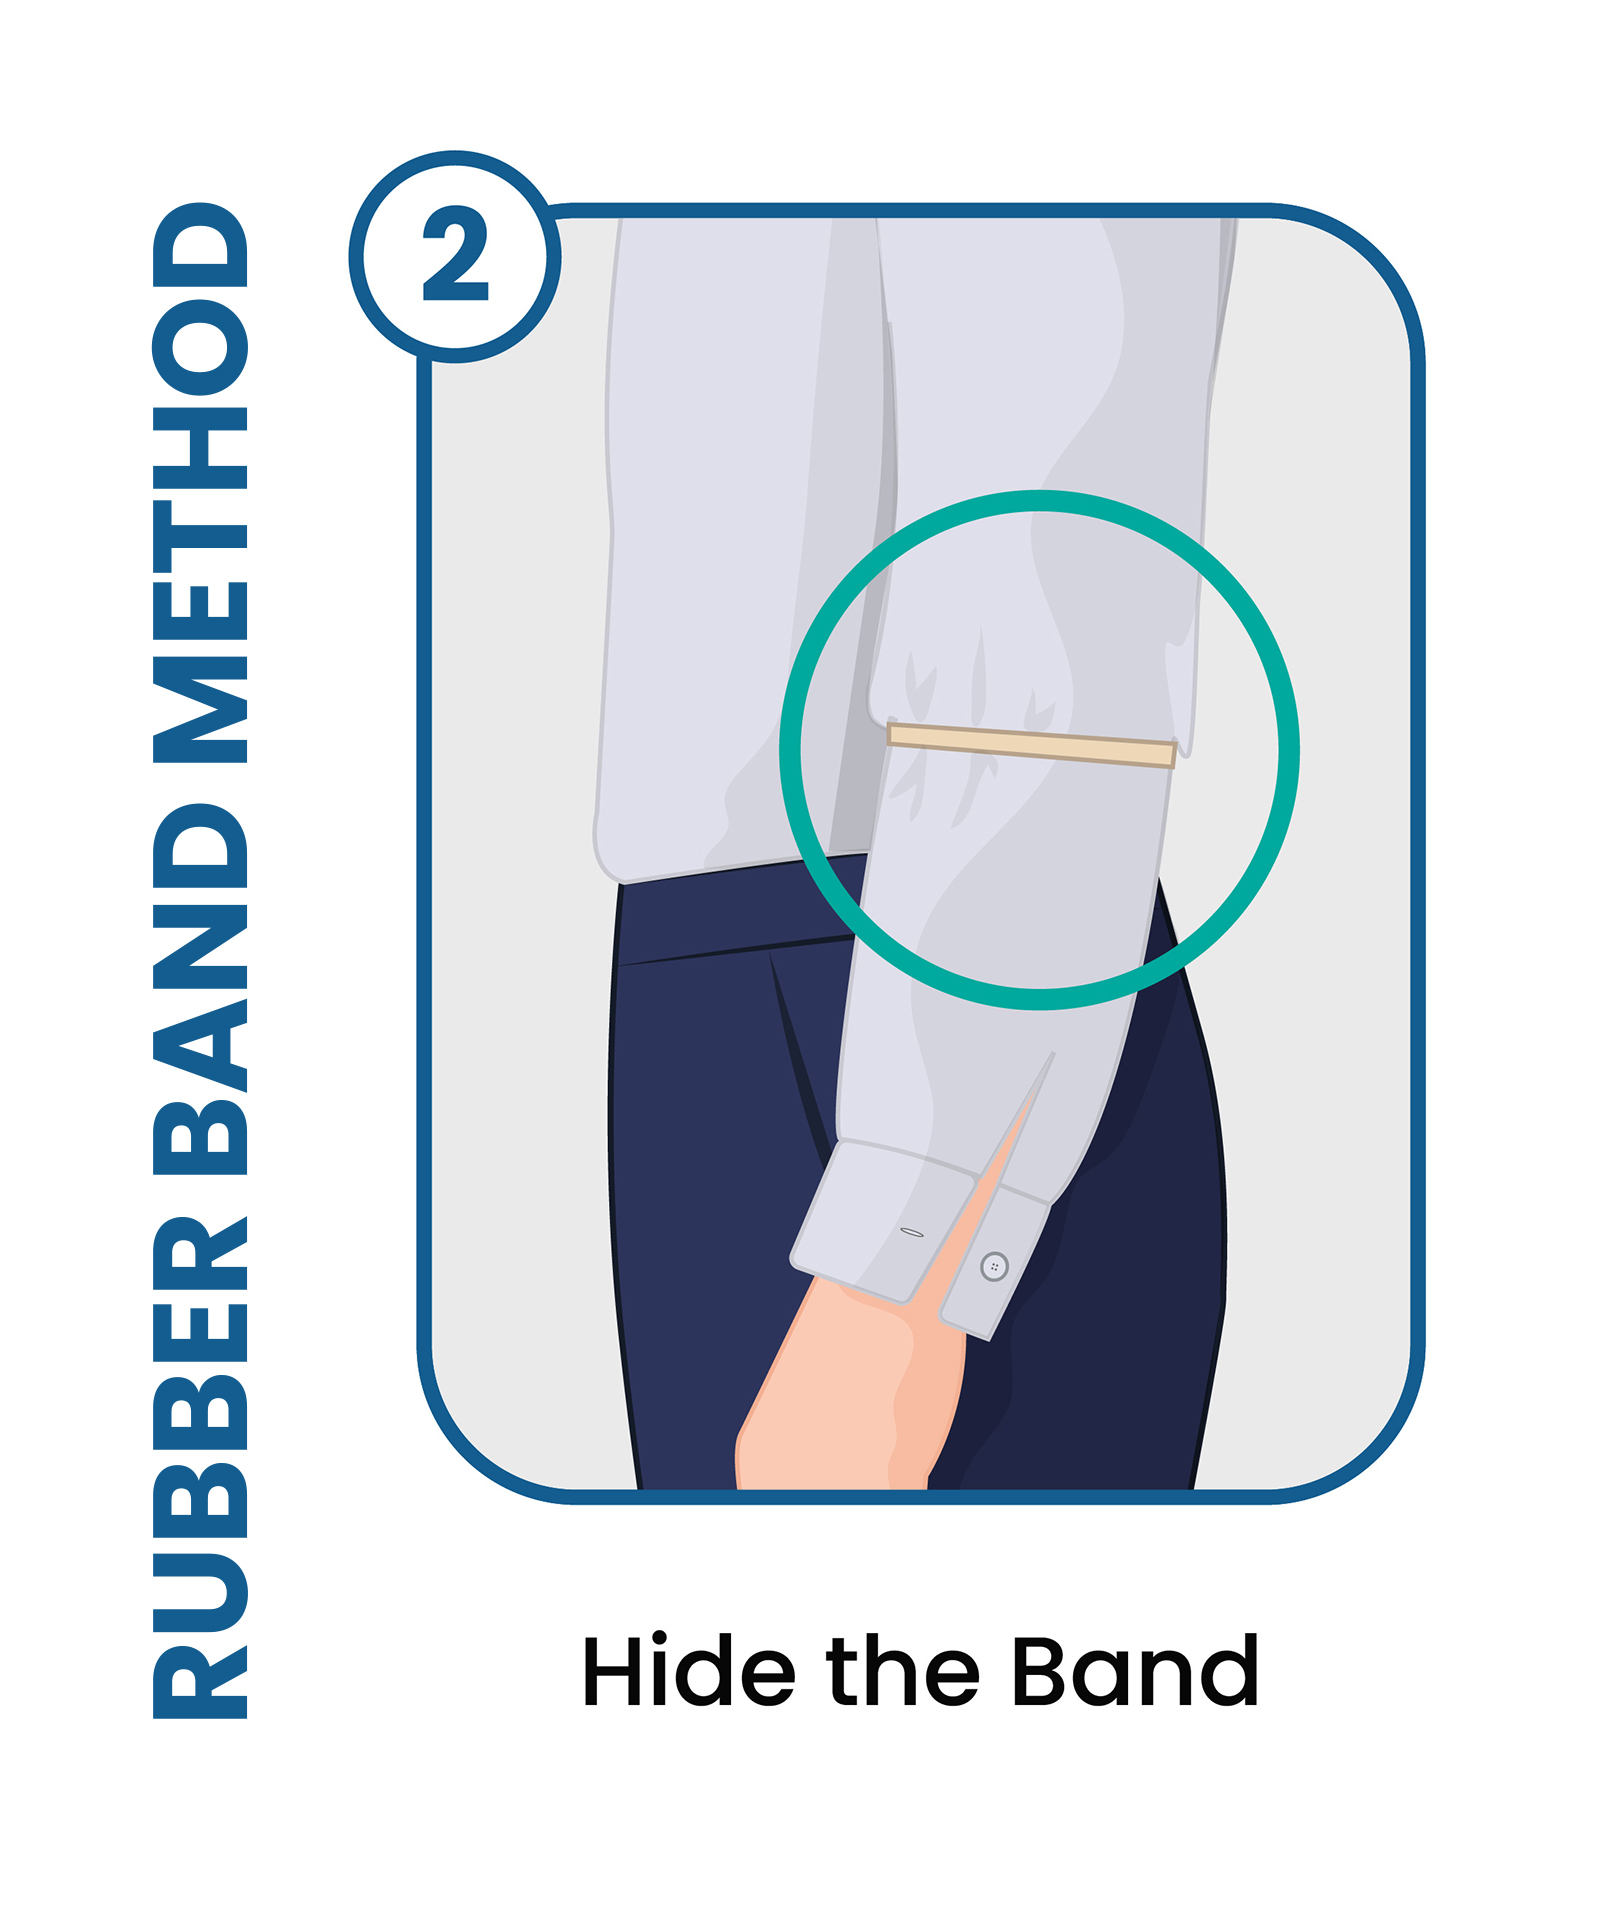 rubber band method: step 2 is to hide the band